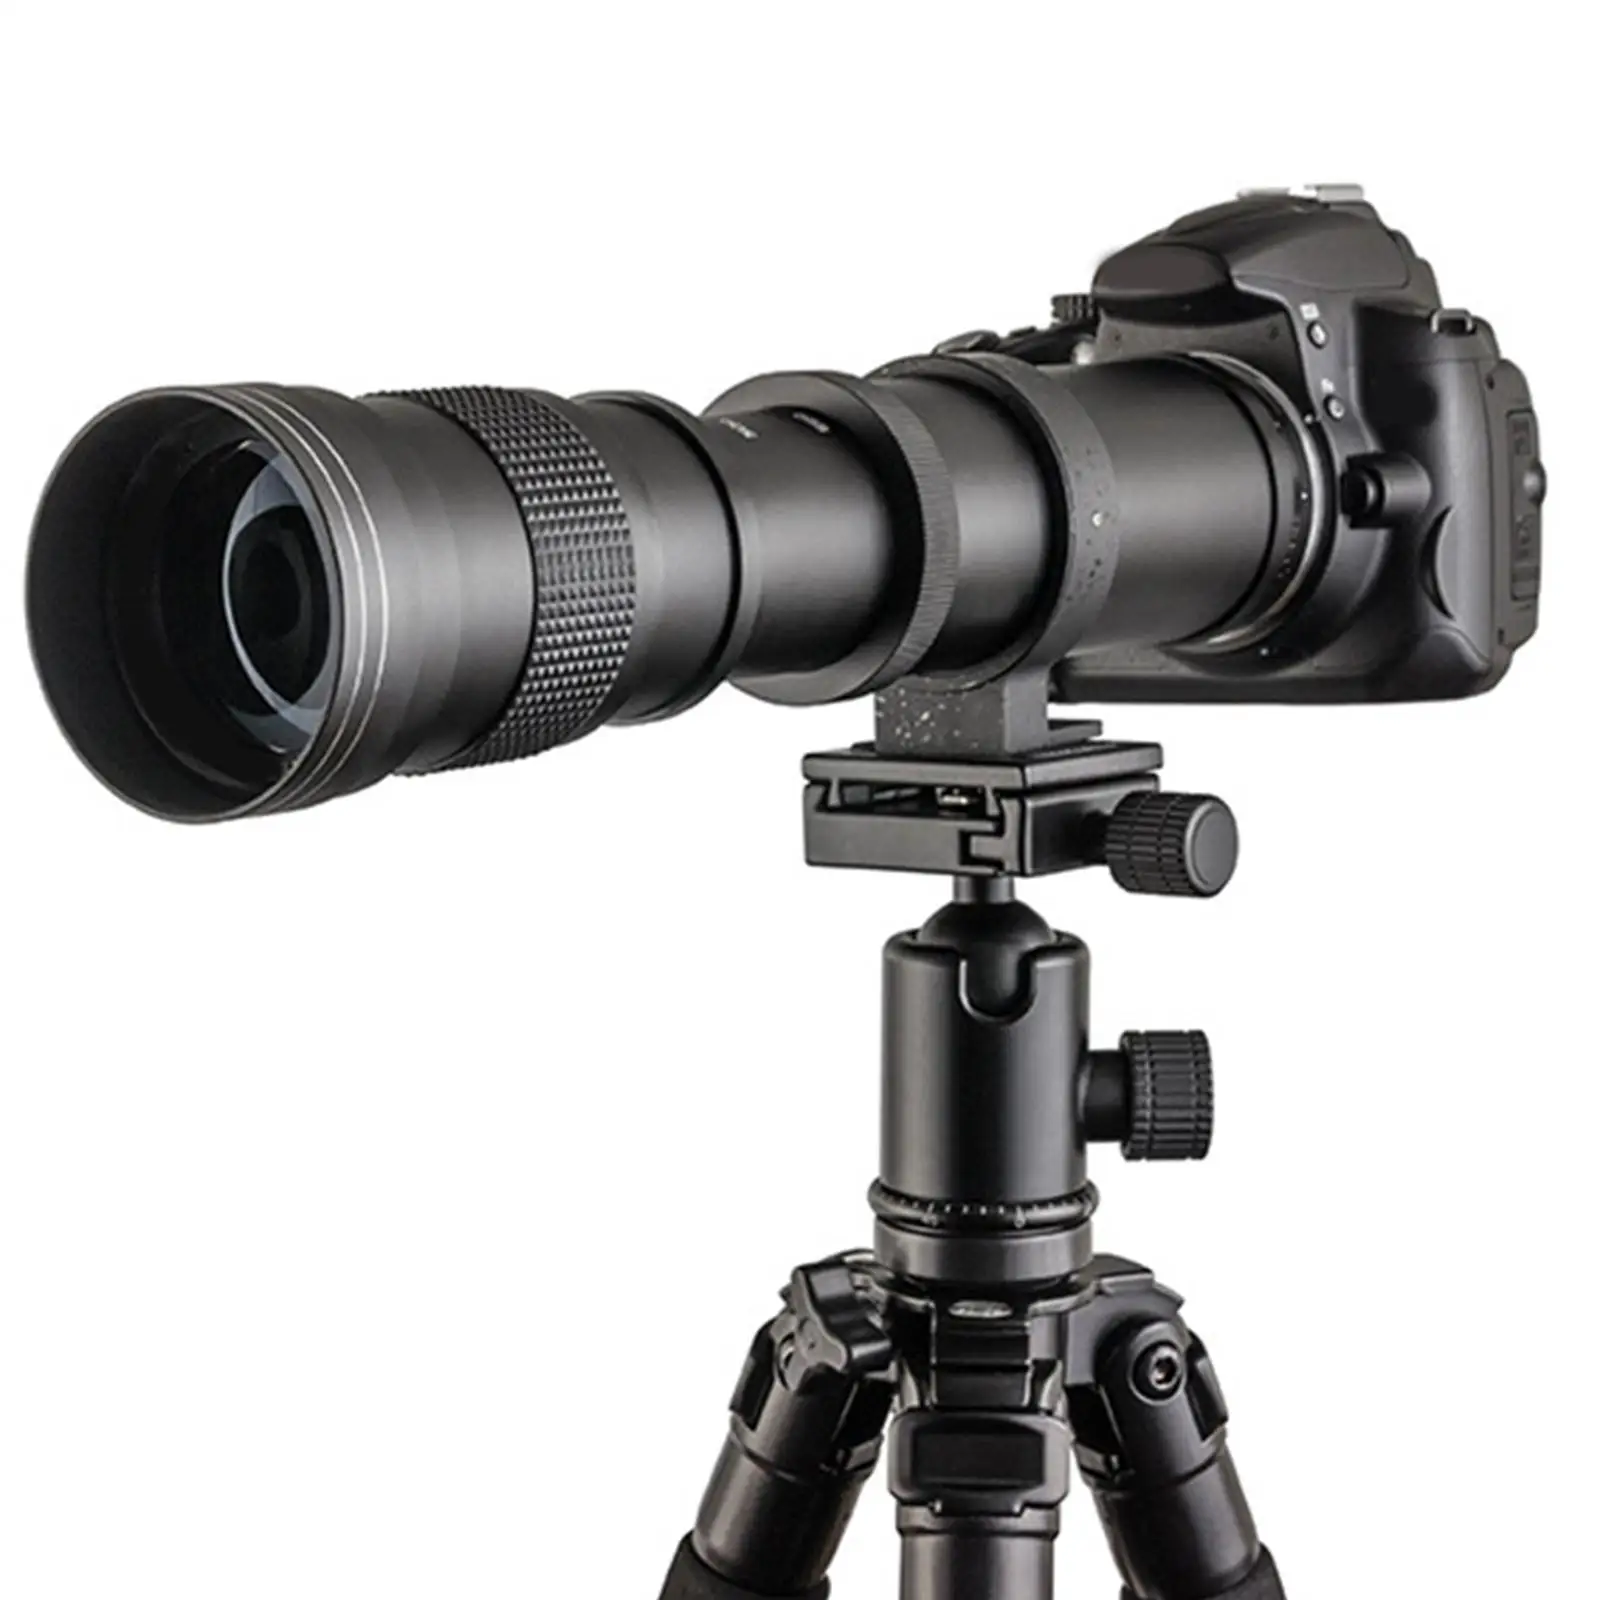 420-800mm Super Telephoto  Lens Metal with Lens Pouch Optical Glass Lens